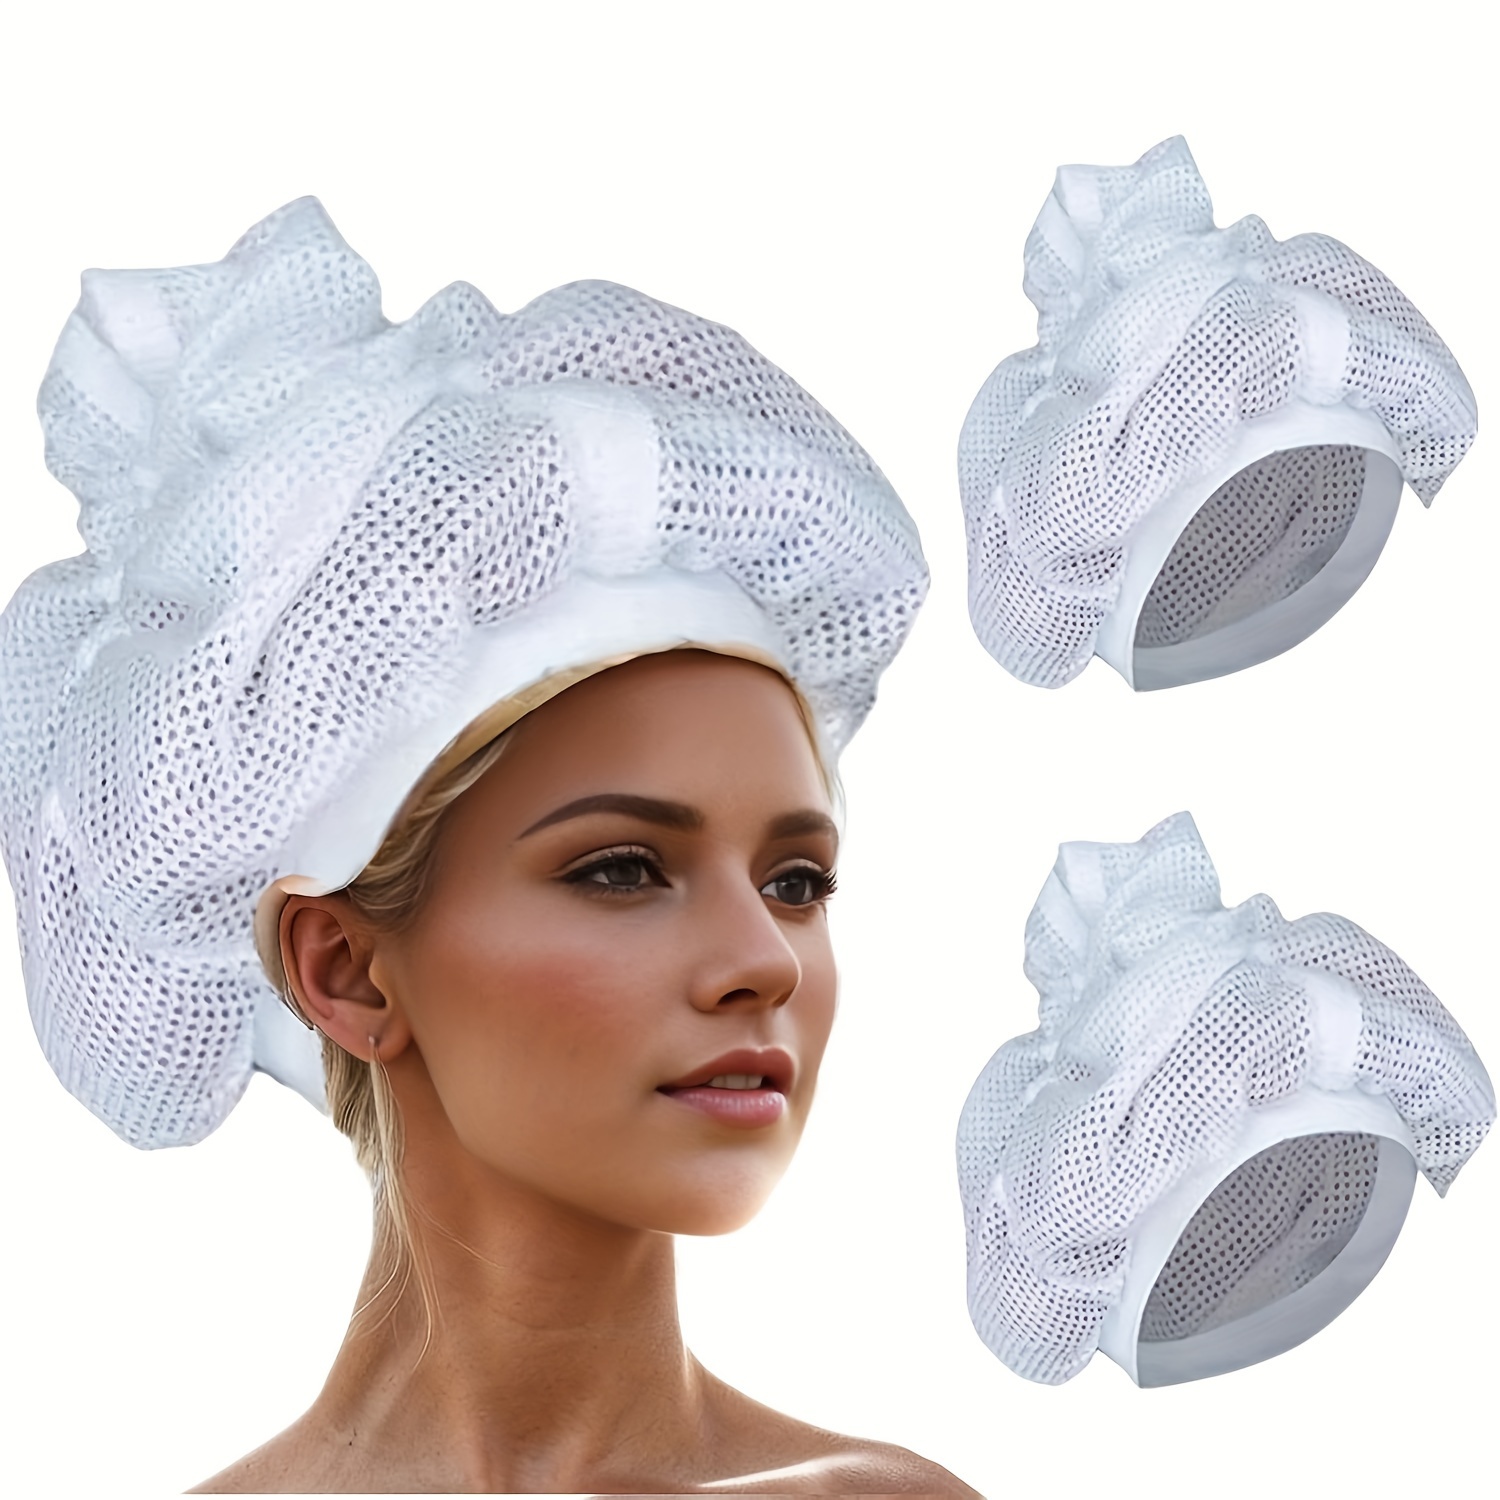  Net Plopping Cap For Drying Curly Hair, Hair Net For Drying, Soulta  Net Plopping Cap, Net Plopping Bonnet With Adjustable Strap, Net Plopping  Satin Diffuser Cap (5 PCS) : Beauty